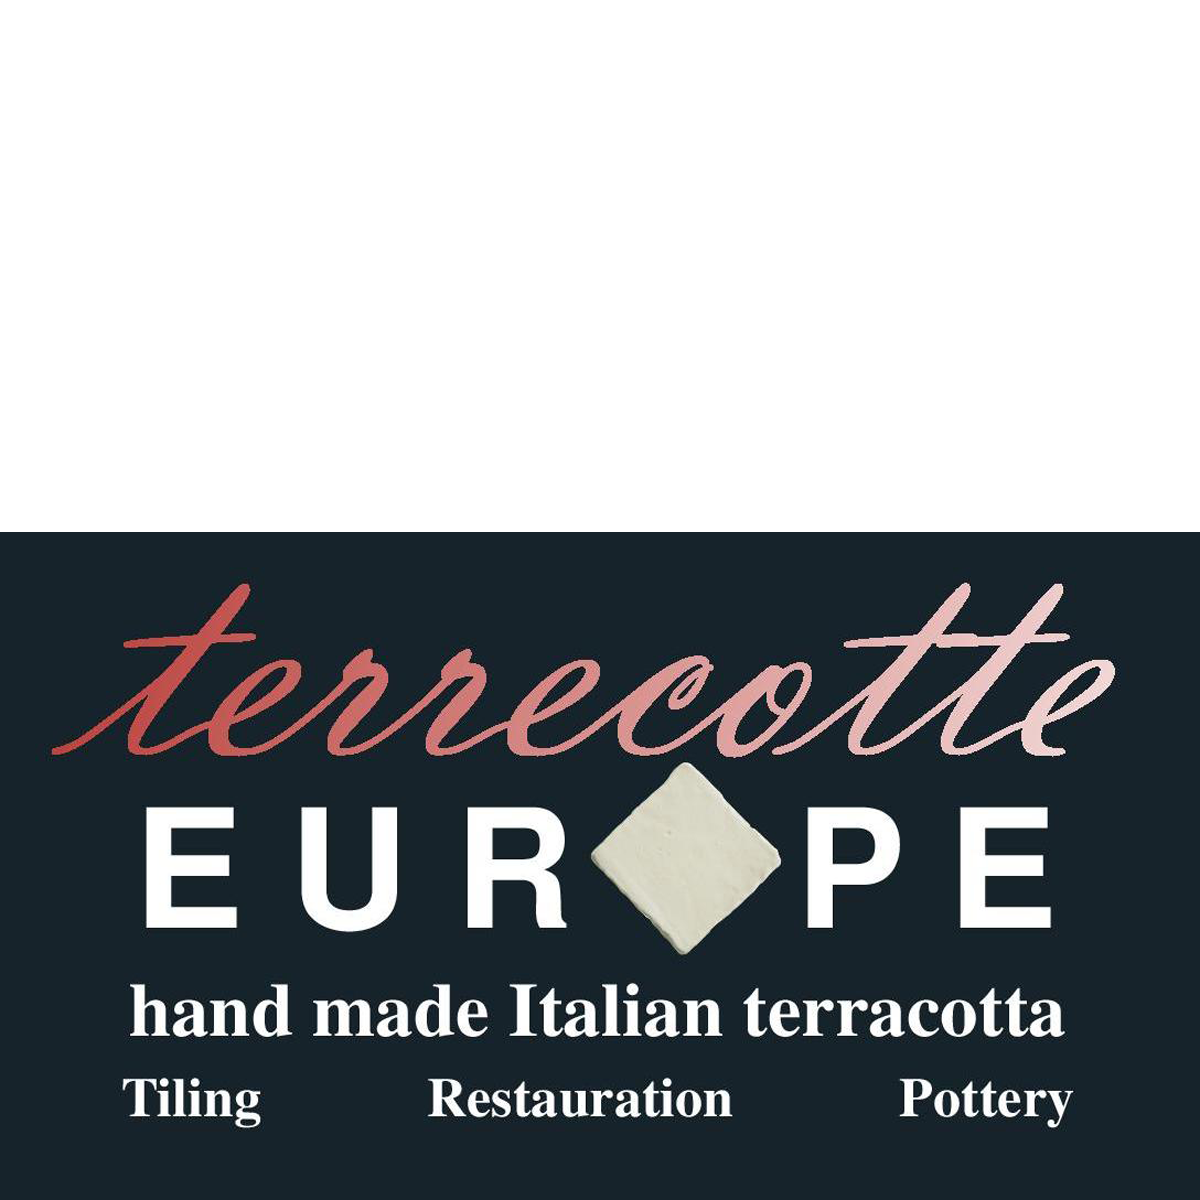 Terracotte Europe